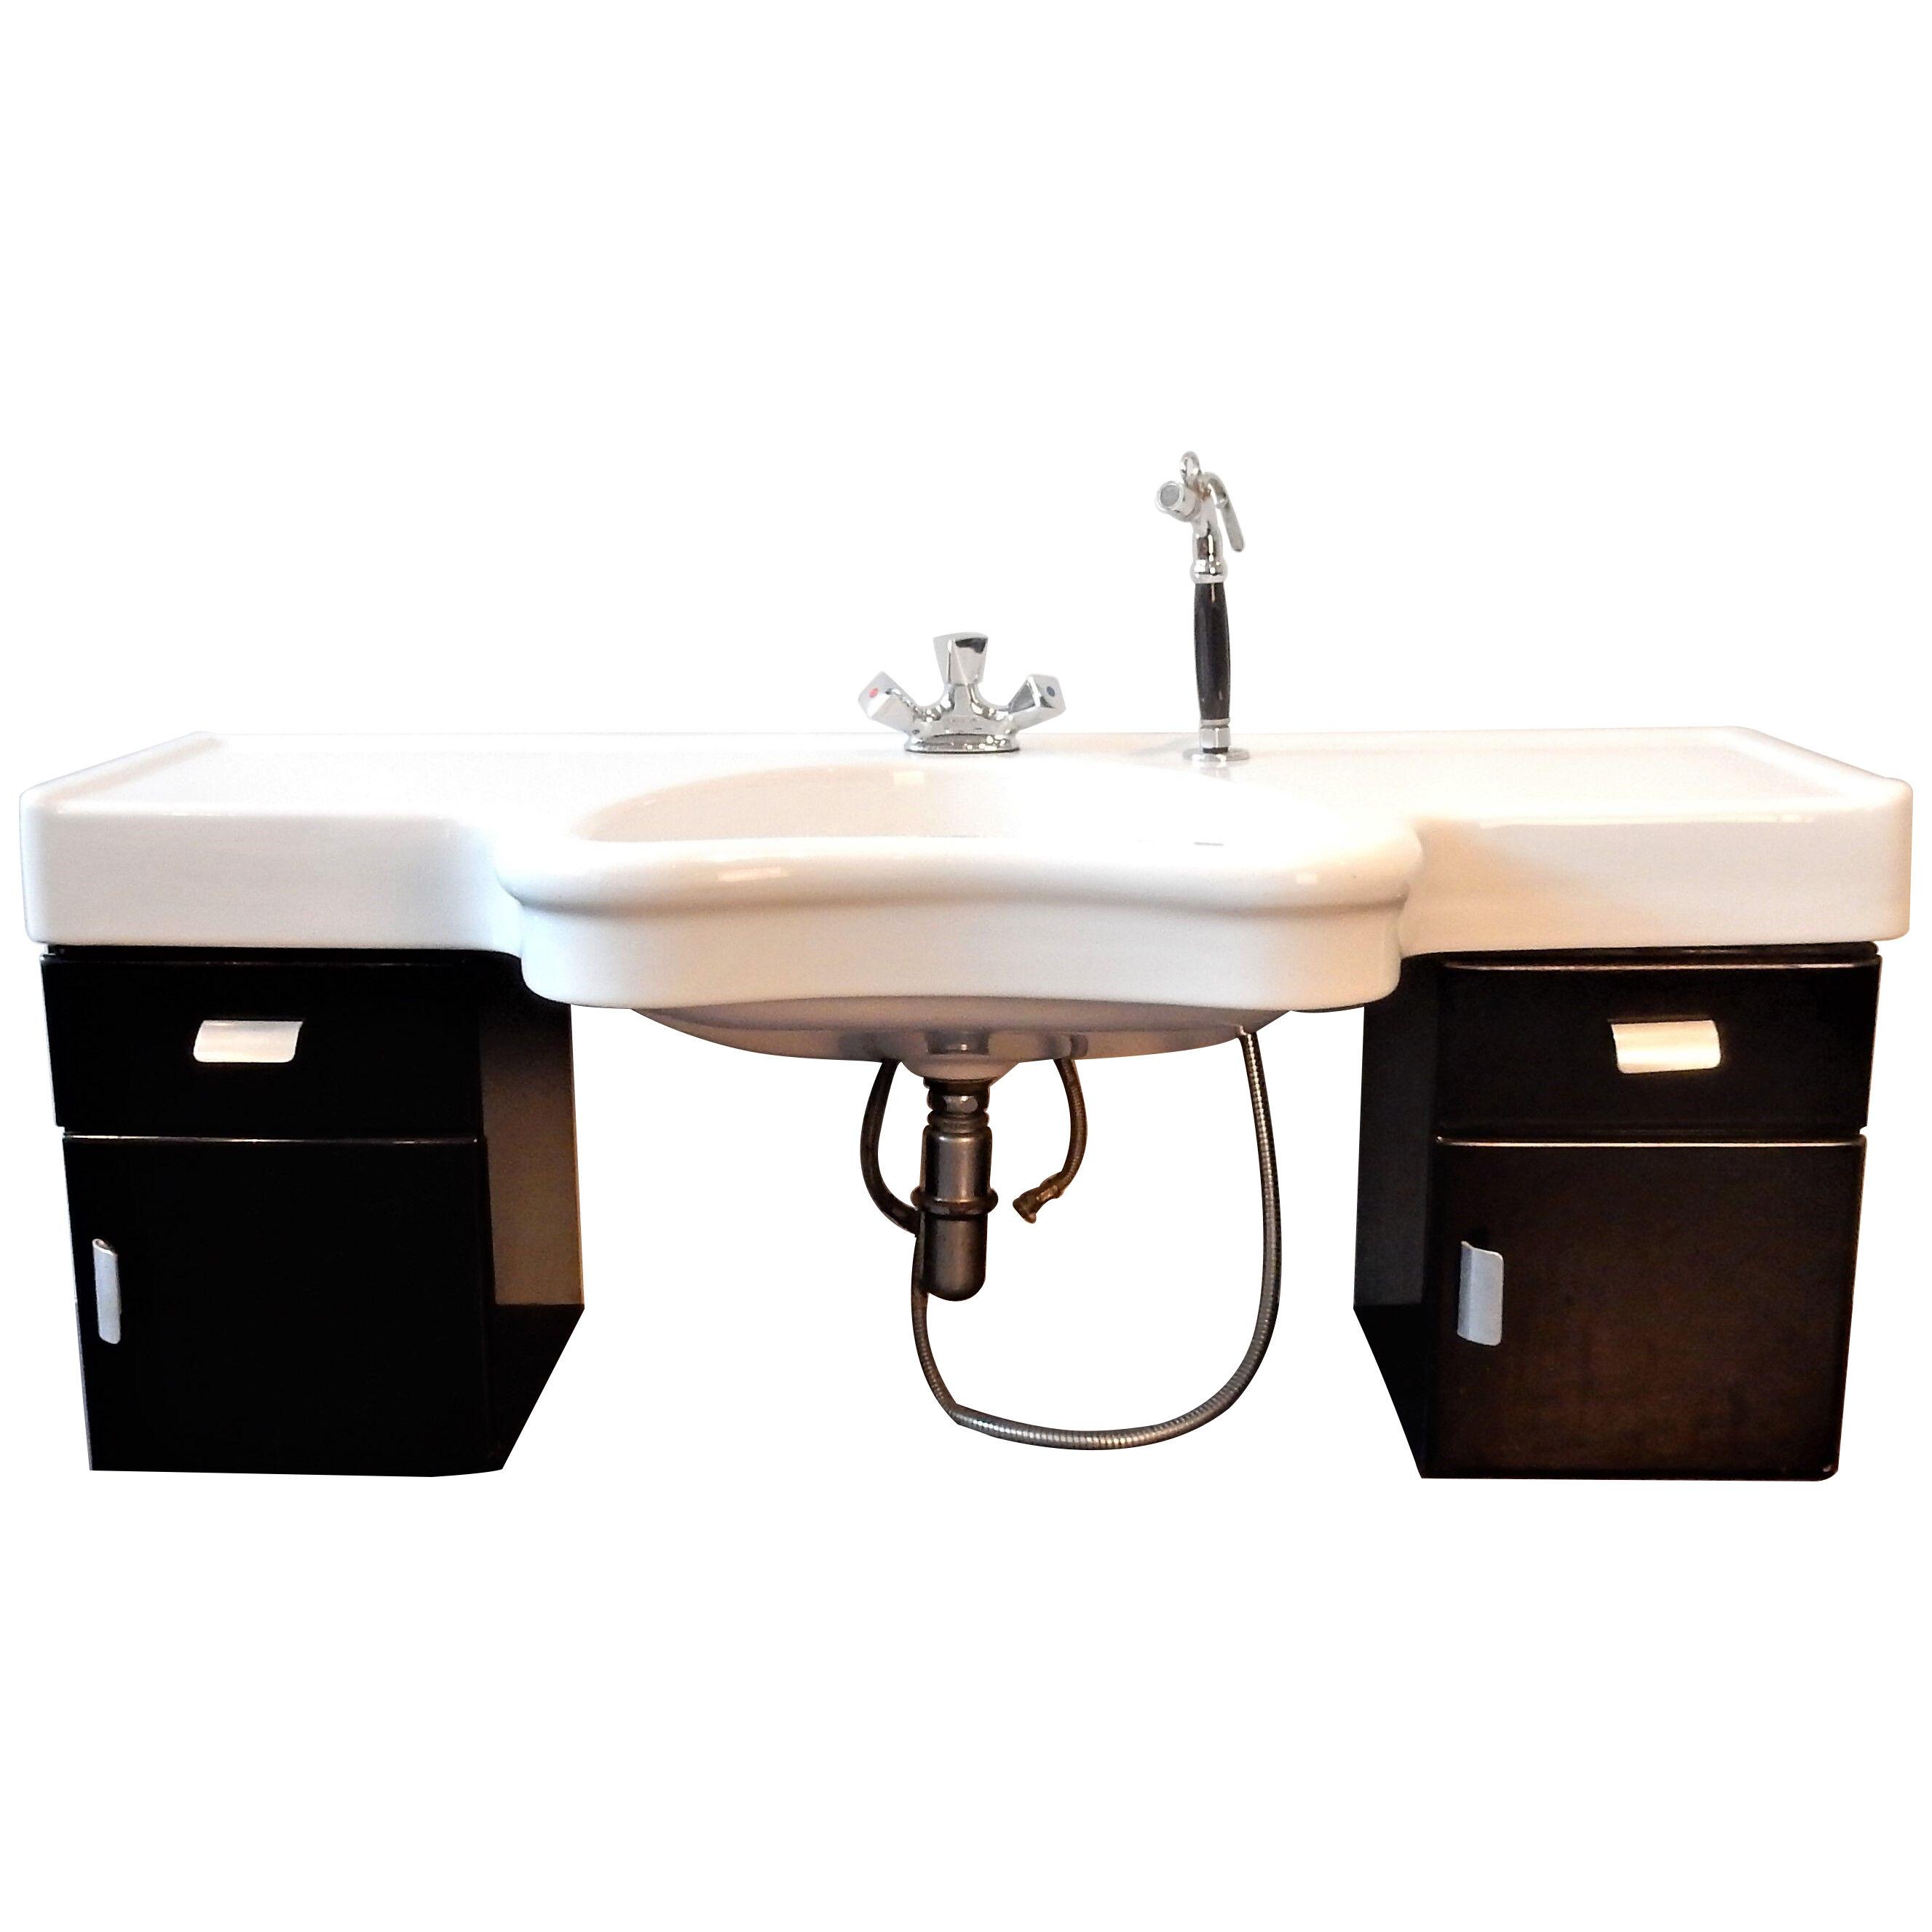 Wall mounted hairdressers wash basin with cabinet by Olymp, 1950's, 5 available